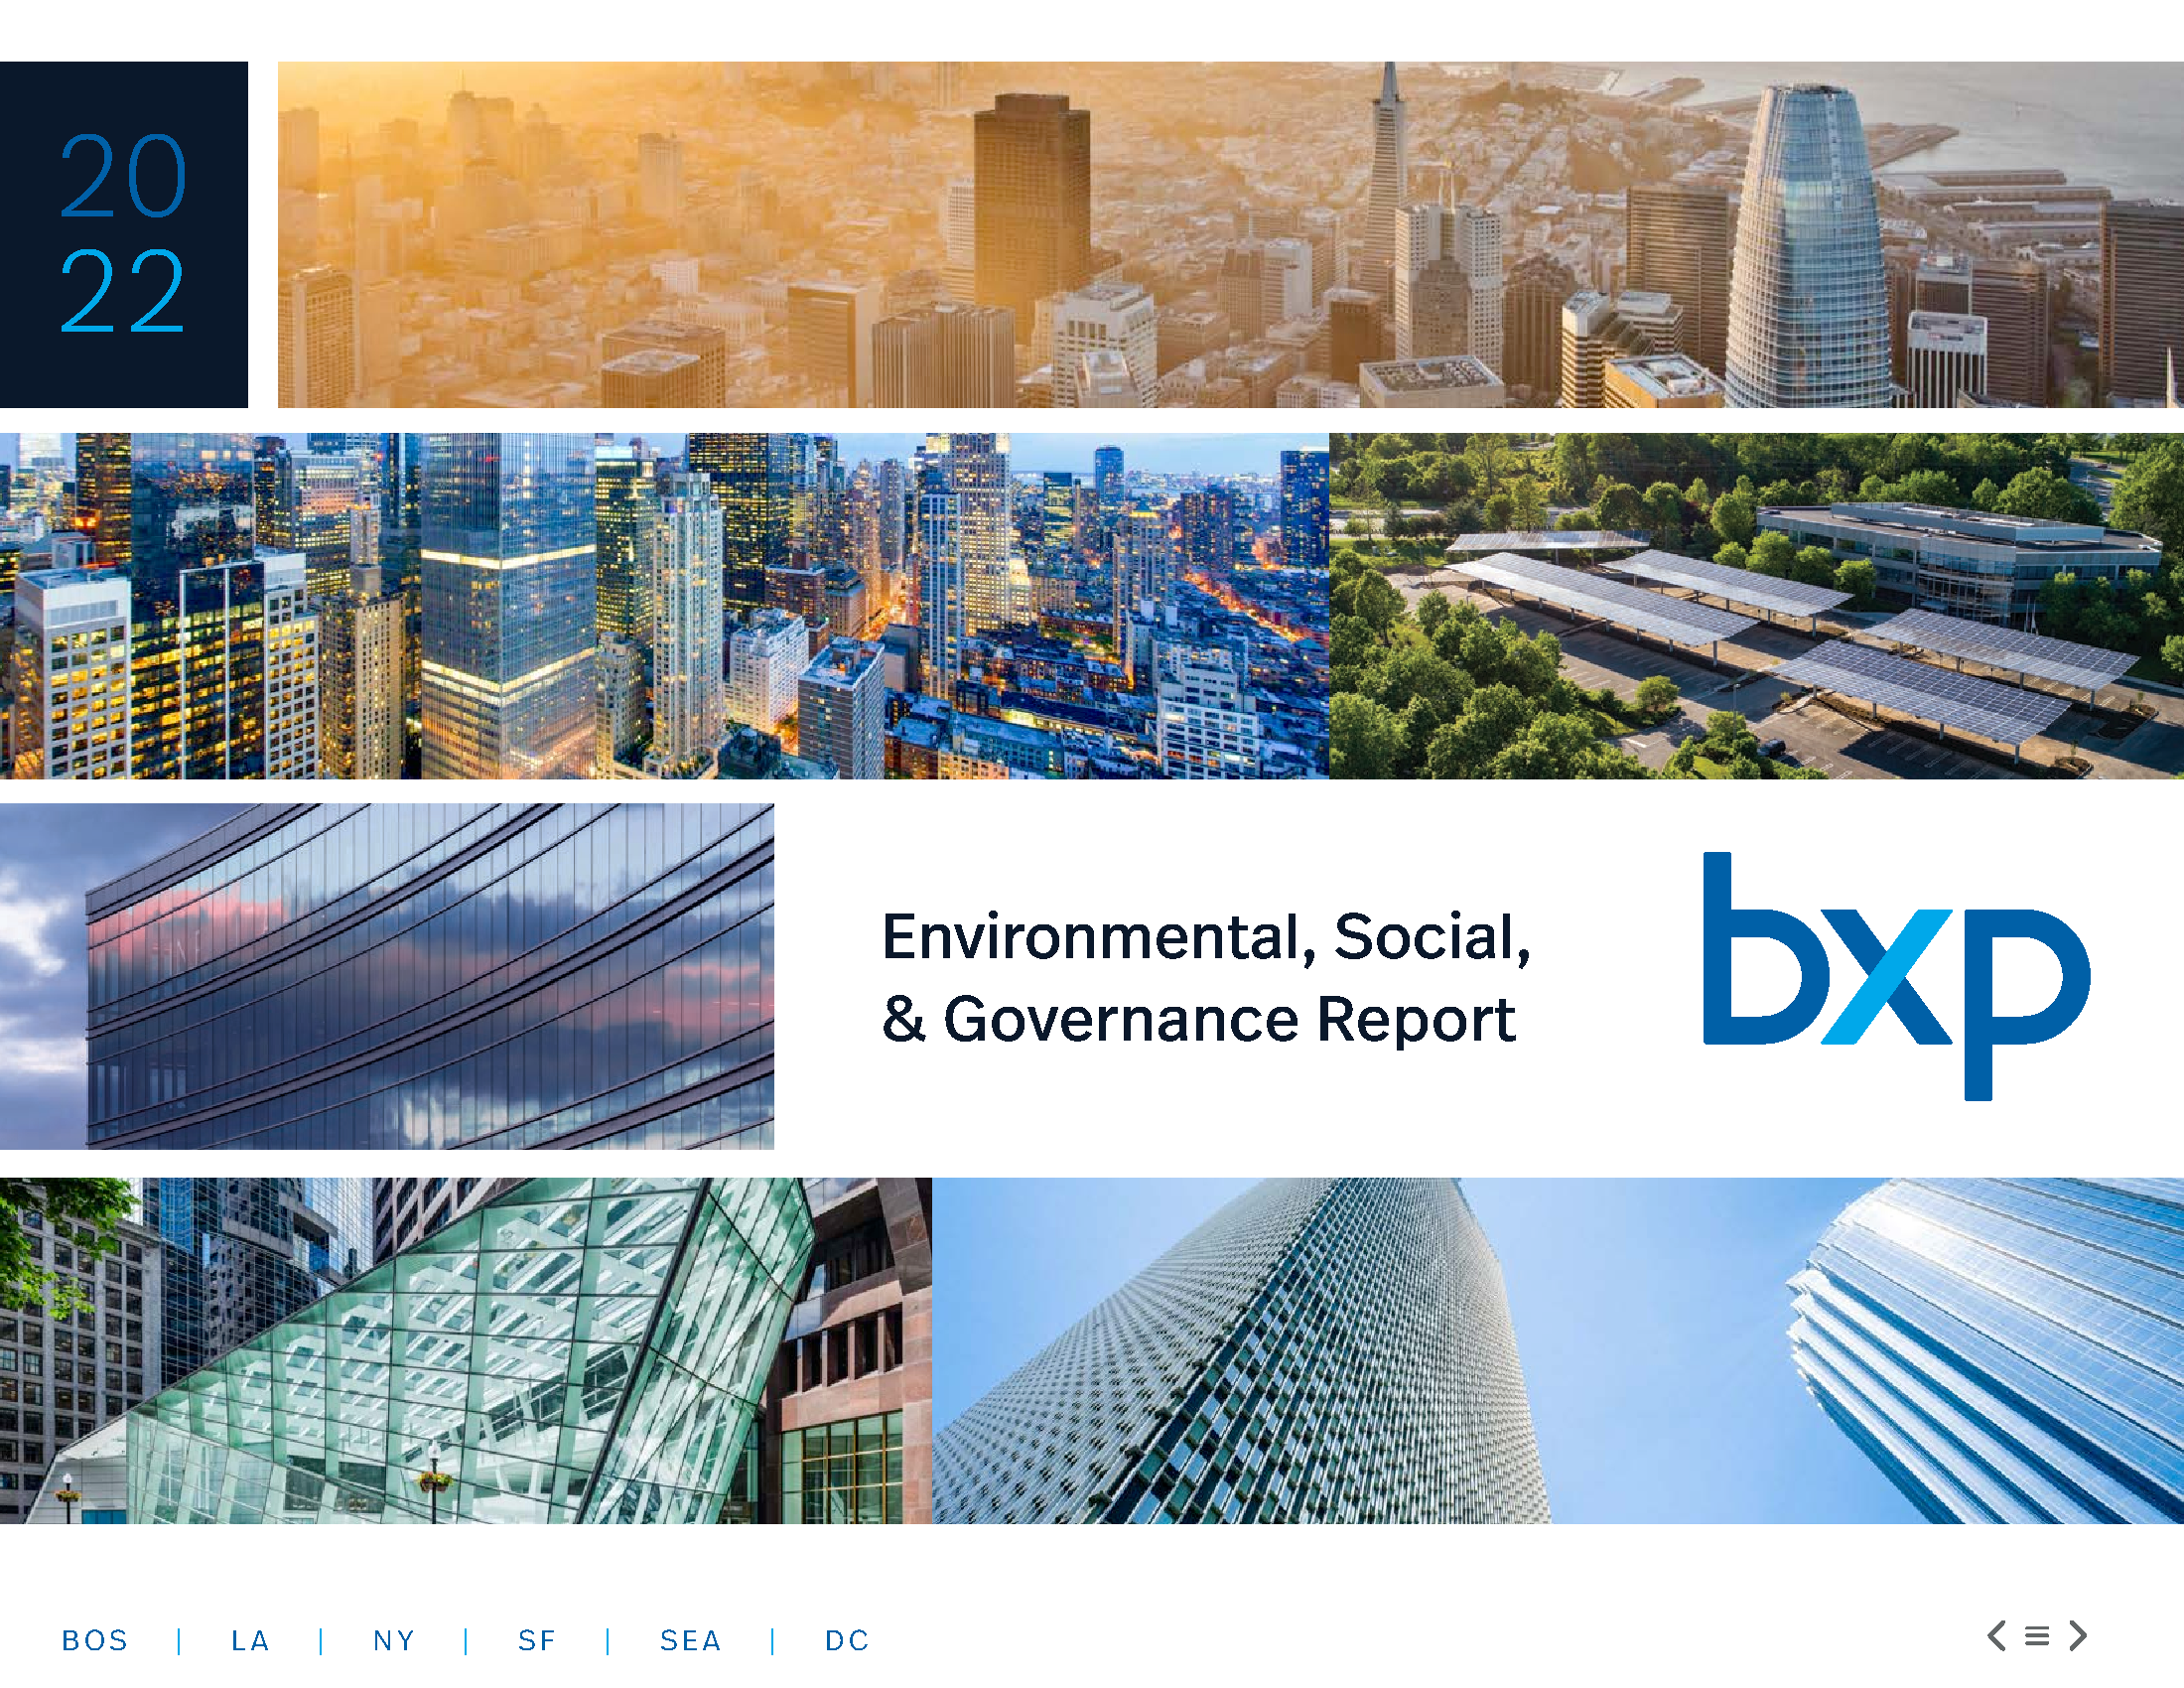 2022 bxp Environmental, Social, & Governance Report with cityscapes in background